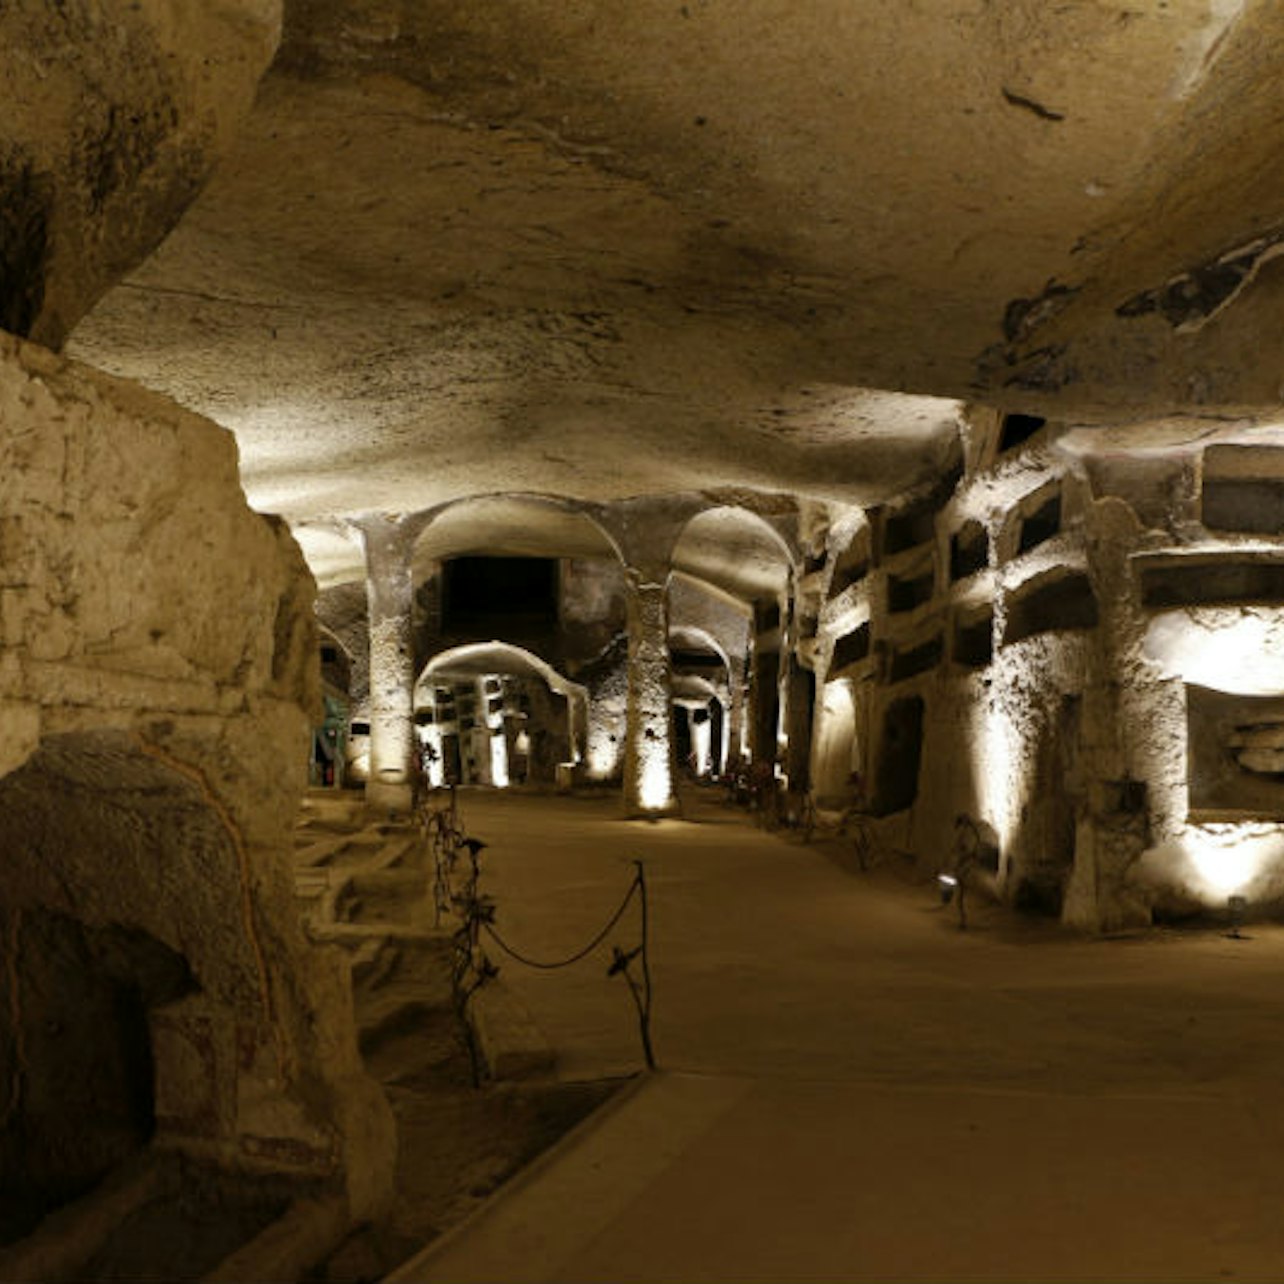 Catacombs of San Gennaro: Guided Visit - Accommodations in Naples